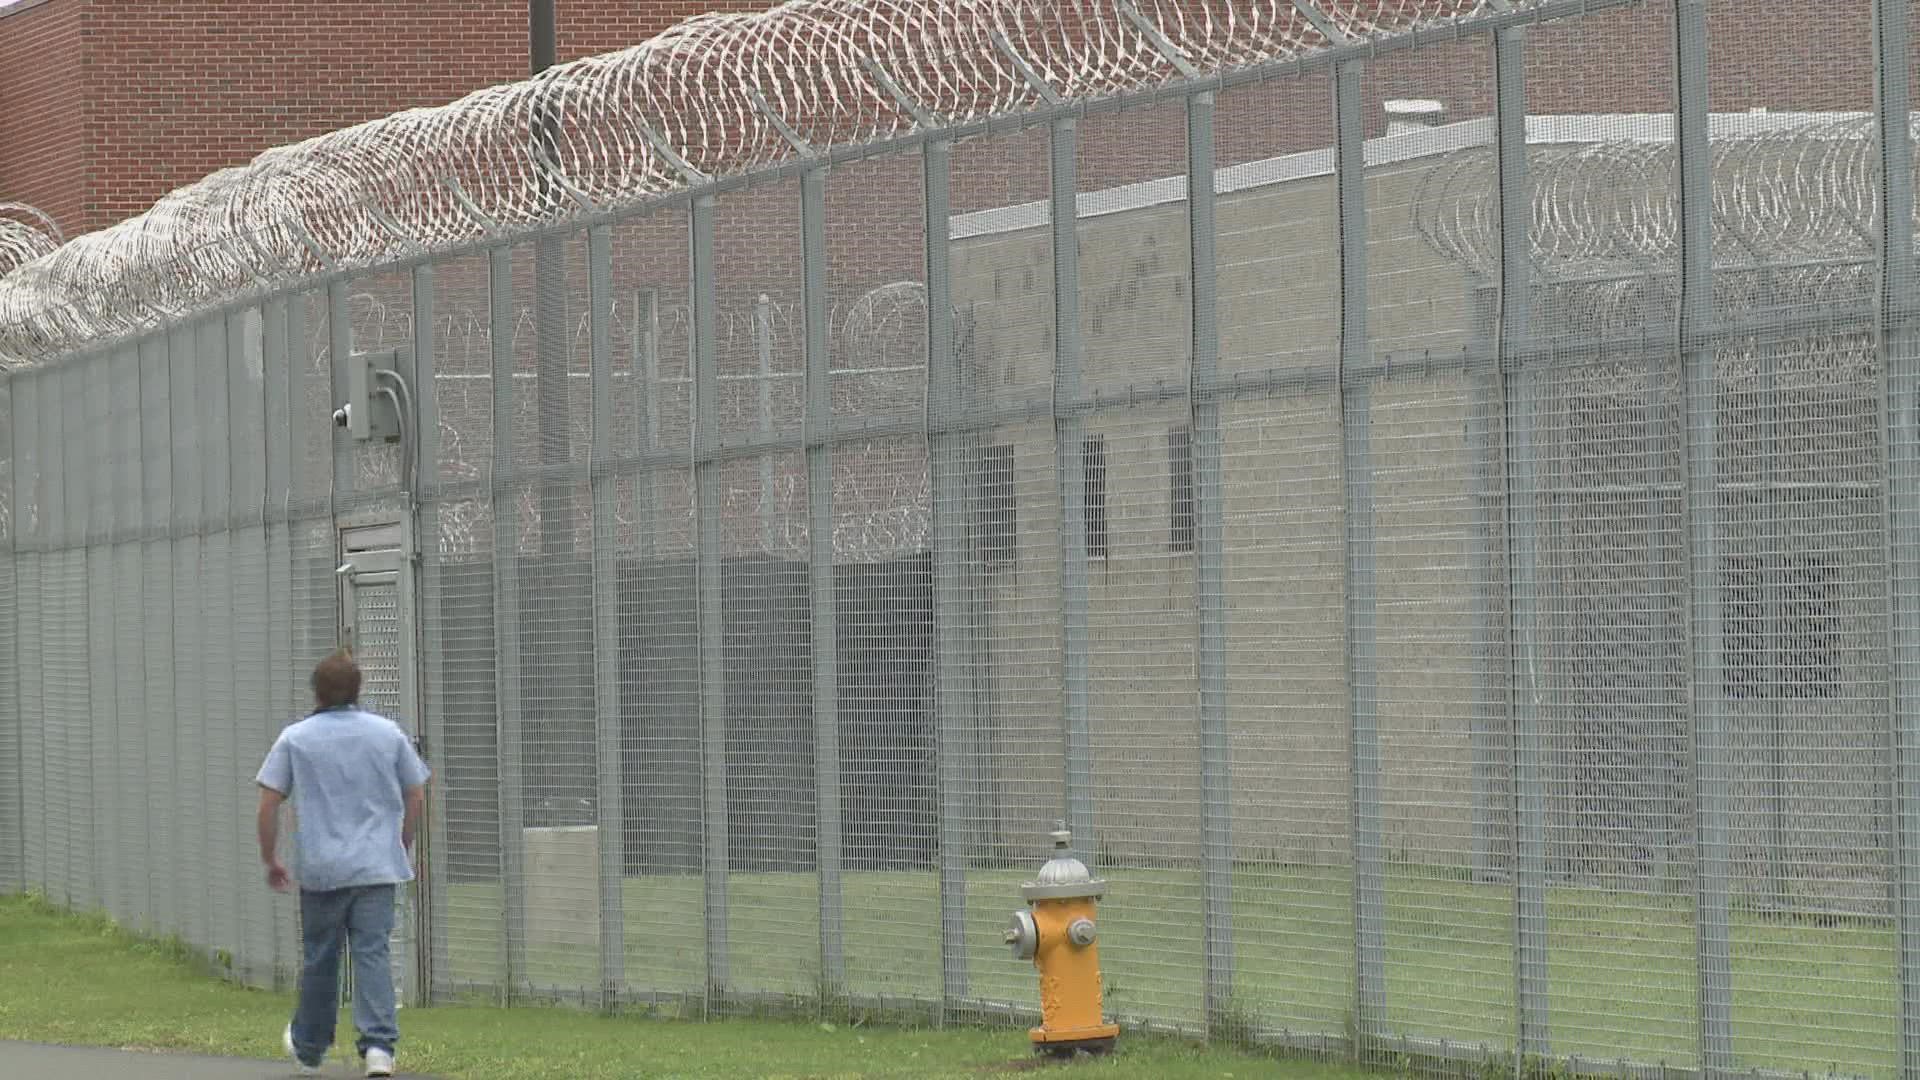 The Maine Correctional Center in Windham has been undergoing a $149.7 million construction and demolition project since 2018.